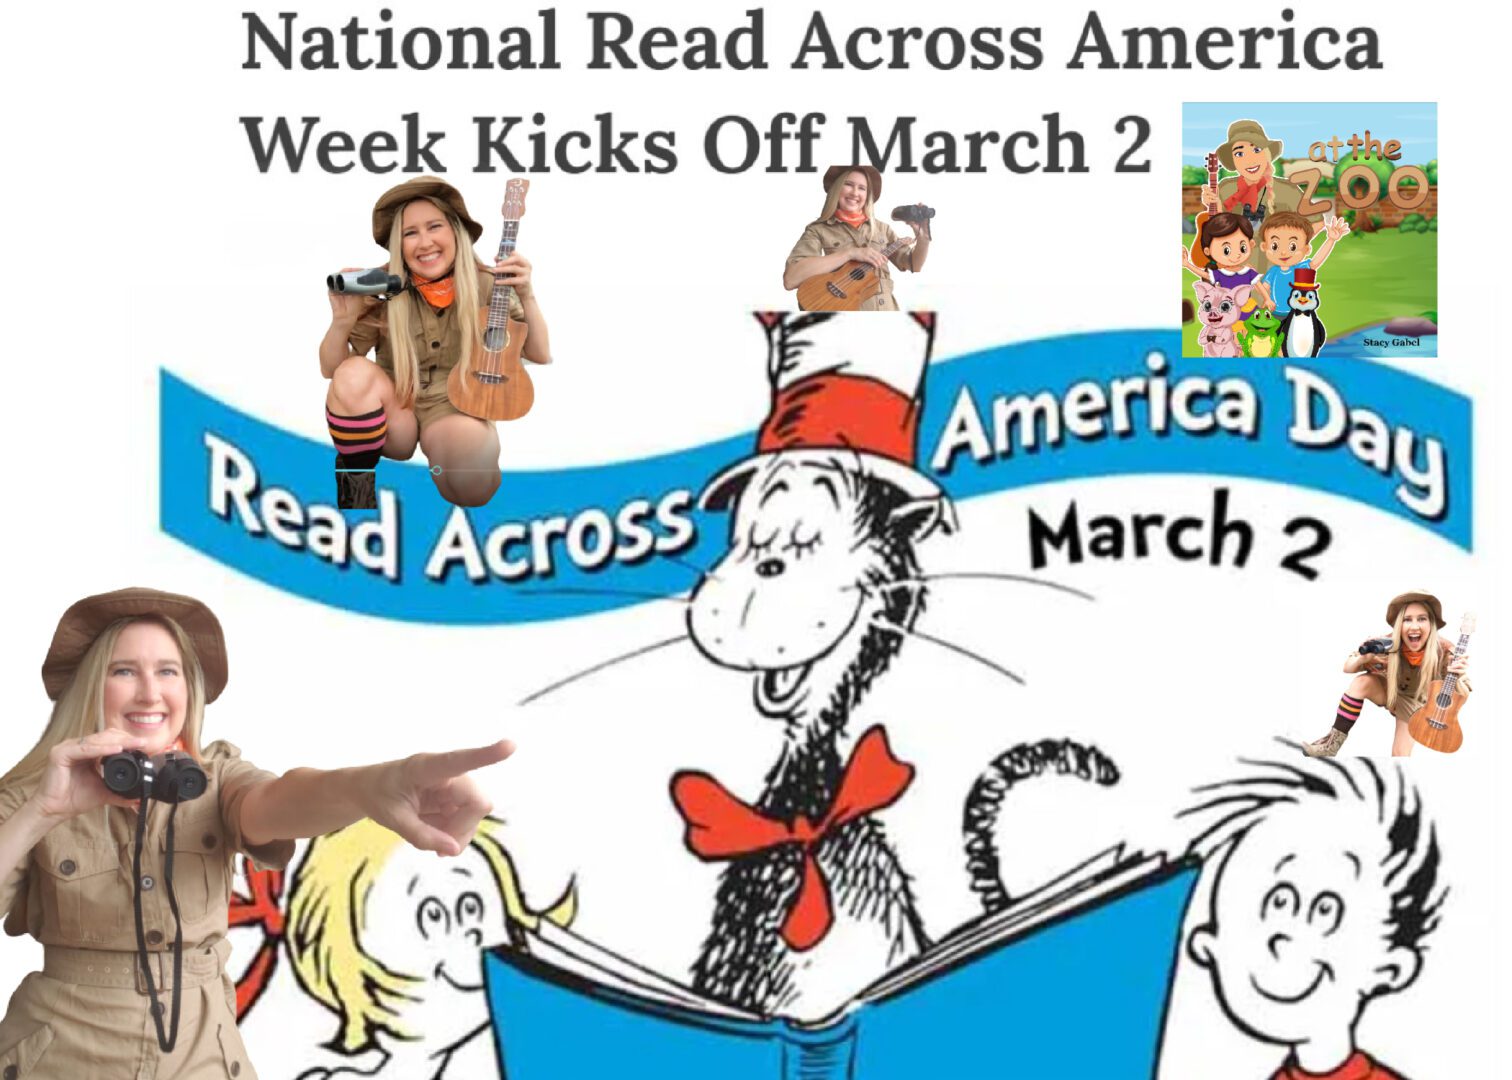 A poster of the national read across america week kicks off march 2.